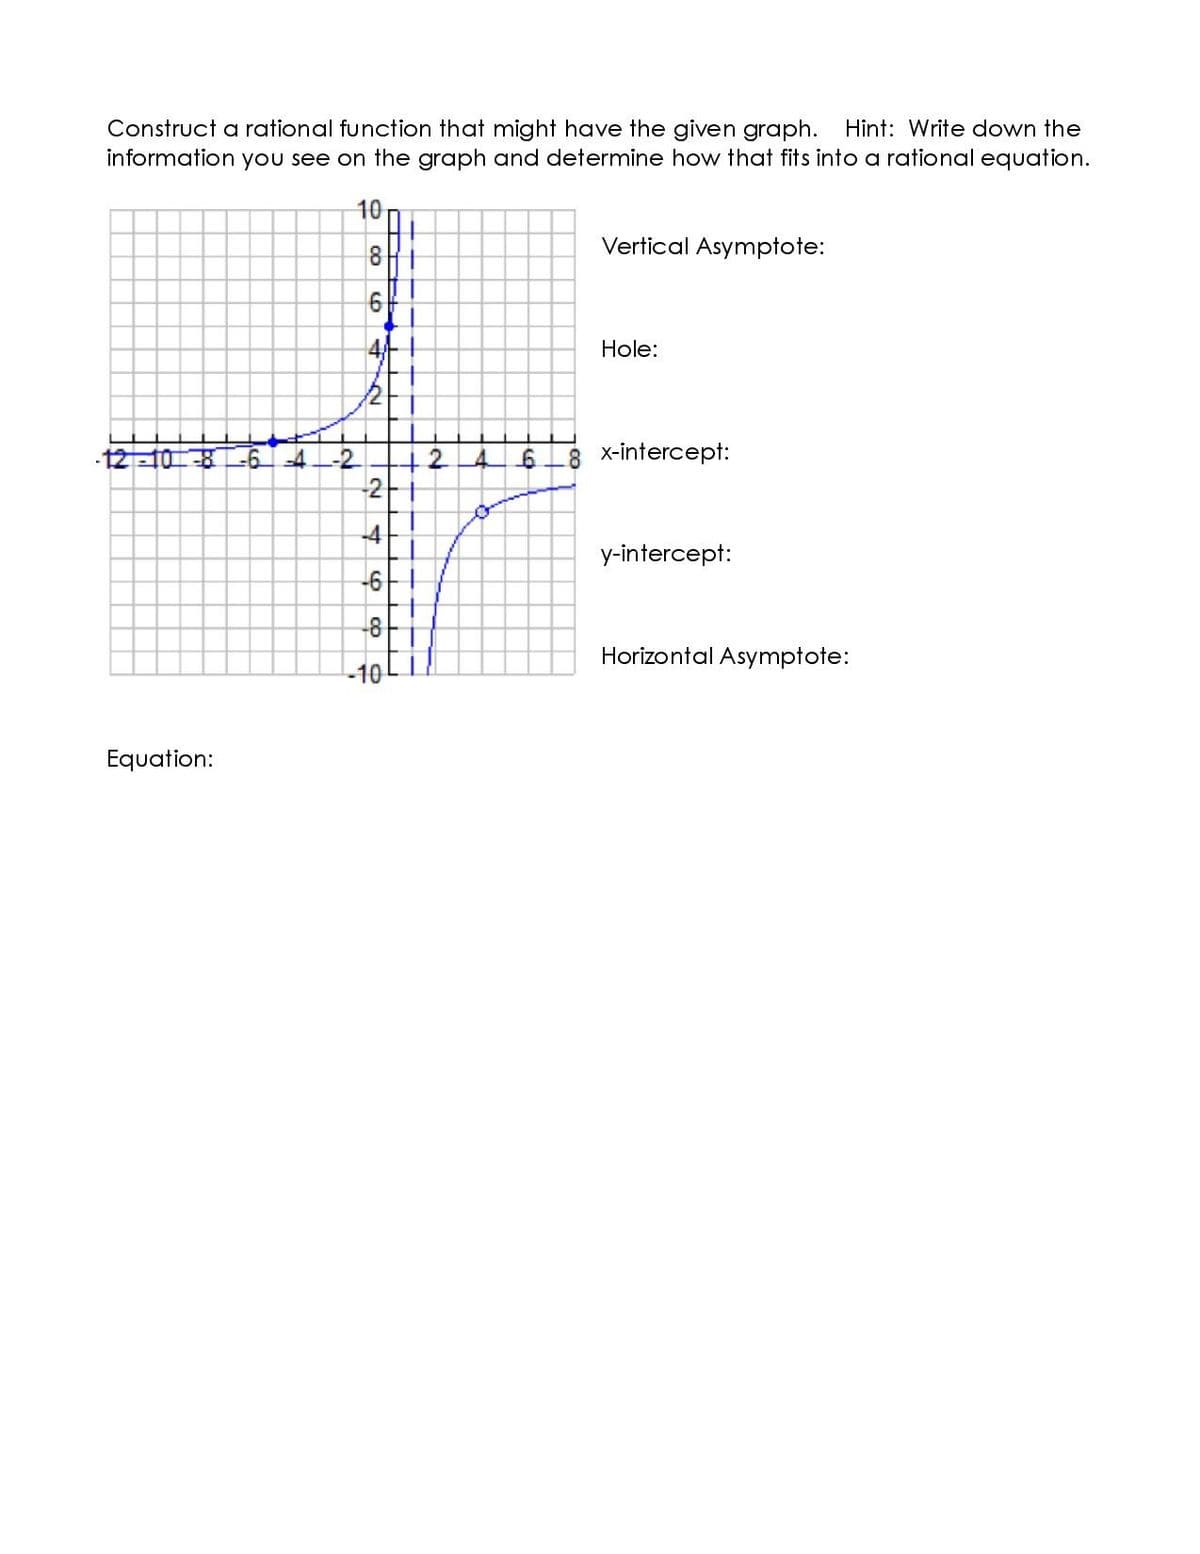 Construct a rational function that might have the given graph. Hint: Write down the
information you see on the graph and determine how that fits into a rational equation.
10
Vertical Asymptote:
4/-
Hole:
12
8 x-intercept:
+246
-2-
-12108-6 -4-2
y-intercept:
-6
Horizontal Asymptote:
10
Equation:
4.
8.
